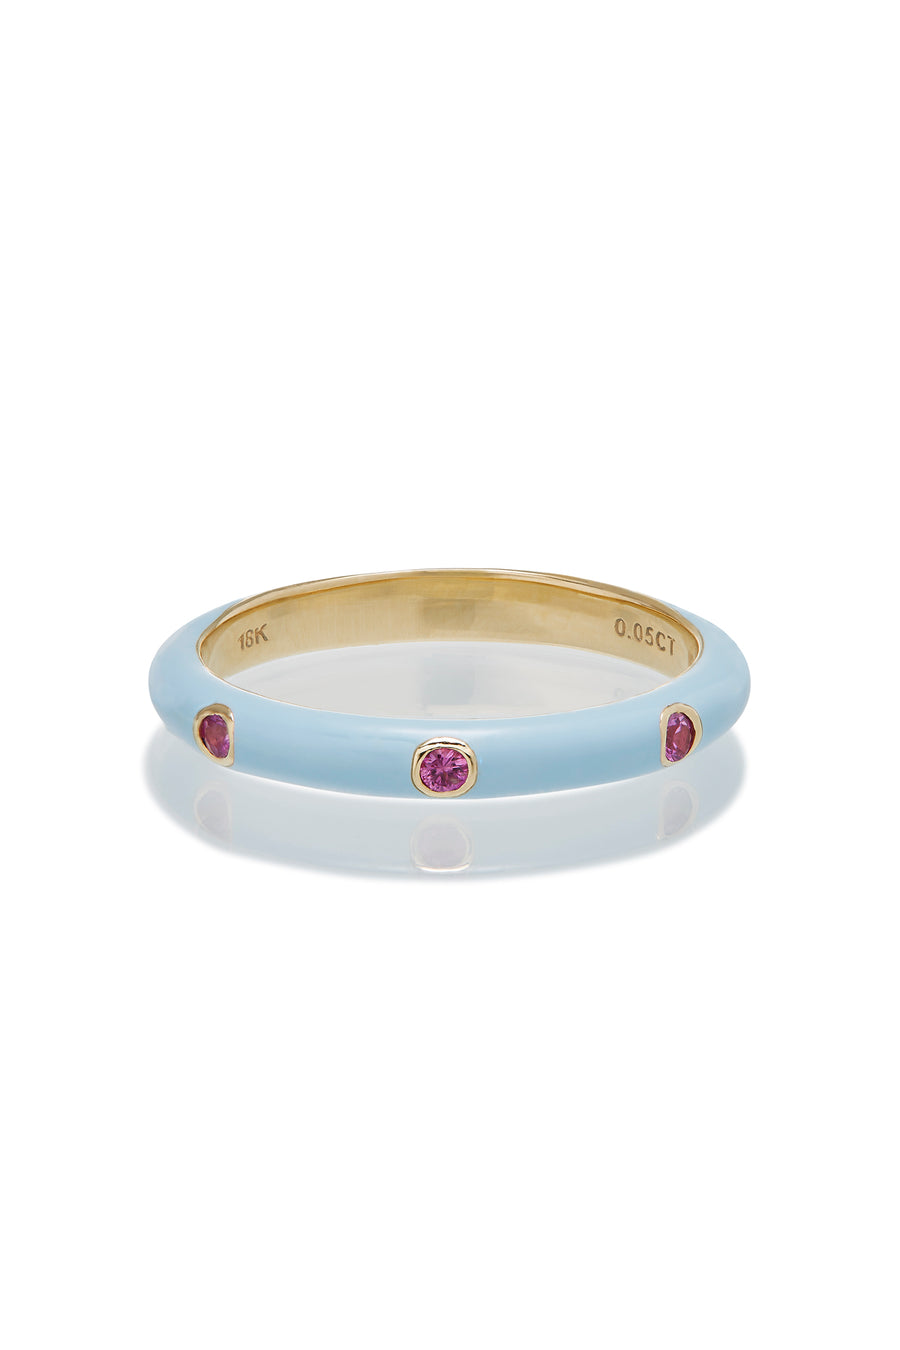 BABY BLUE ENAMEL WITH PINK SAPPHIRE BEZELS